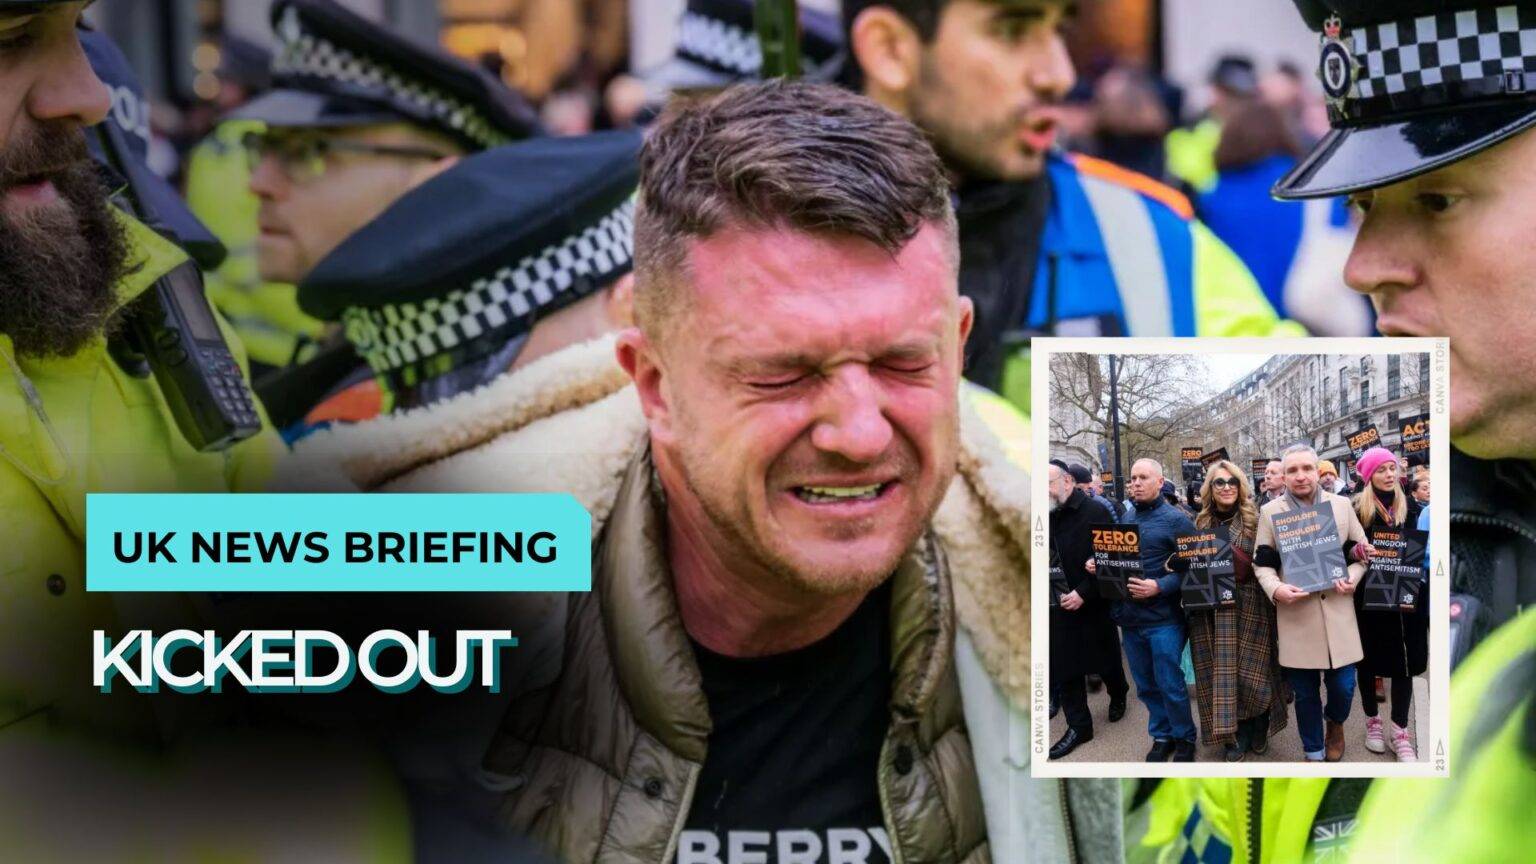 Tommy Robinson arrested and pepper sprayed during march against anti-semitism